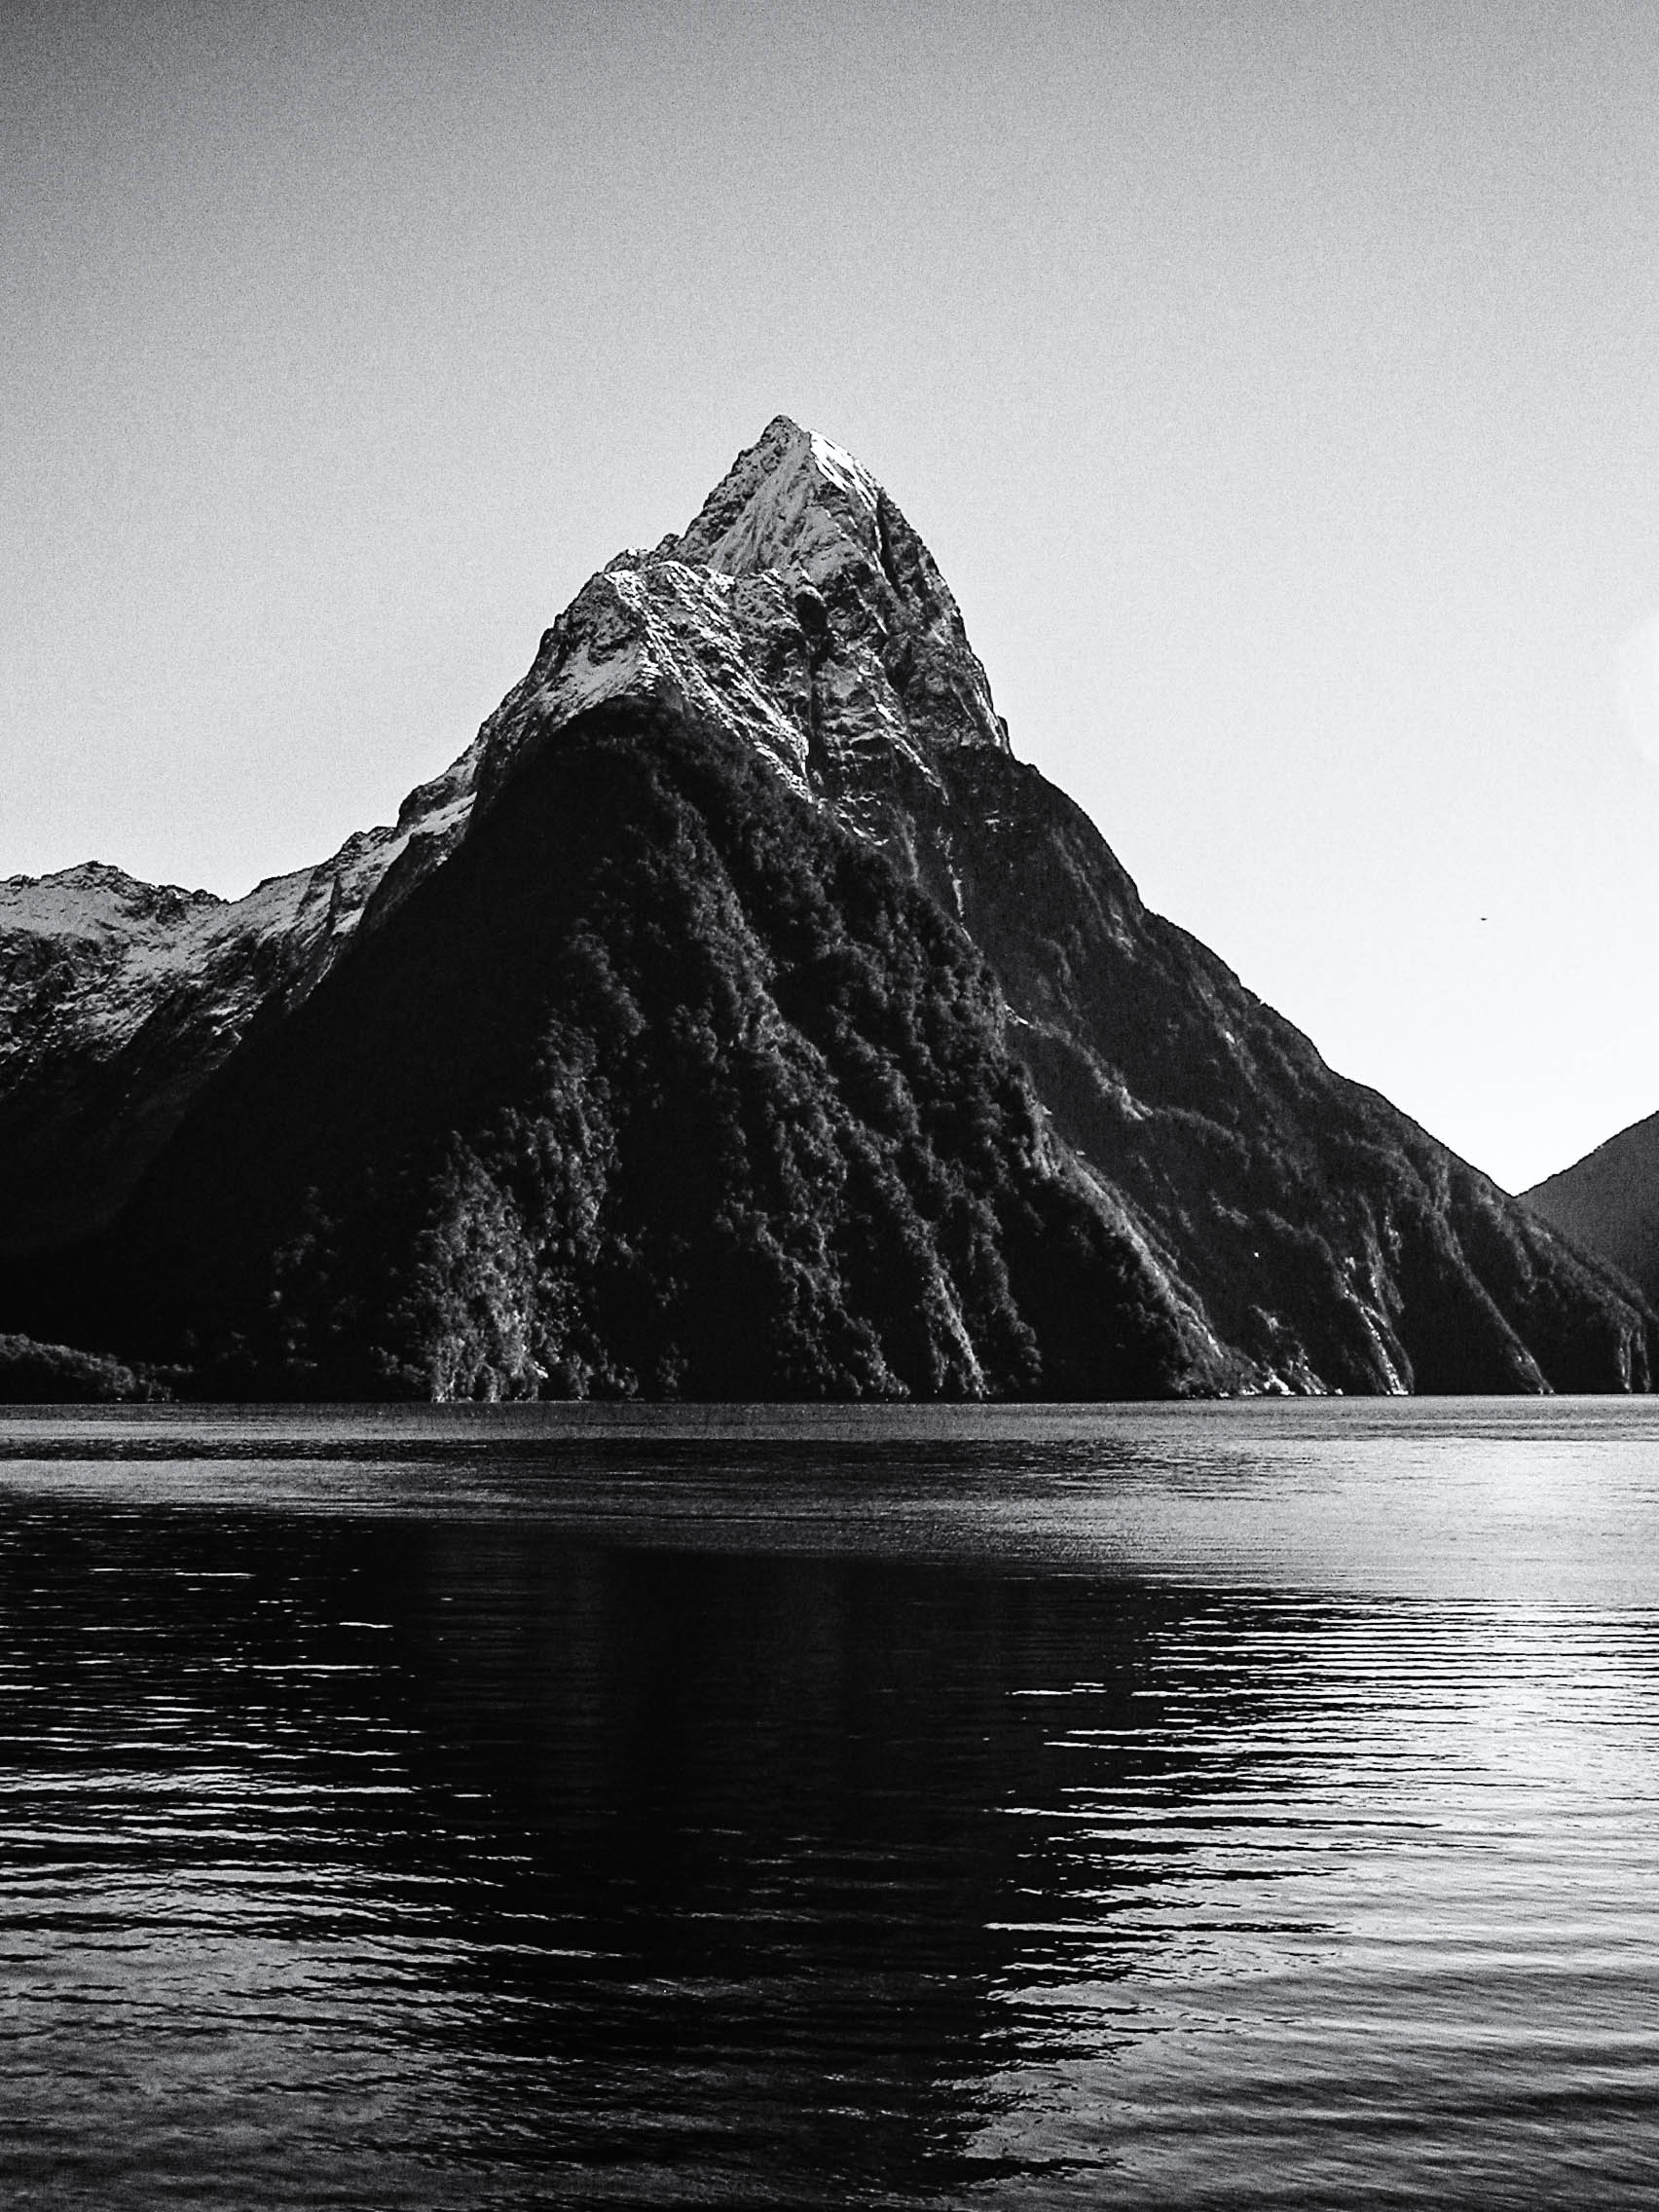 Black and White Mountain Peak Logo - Milford Sound – Photography by CyberShutterbug